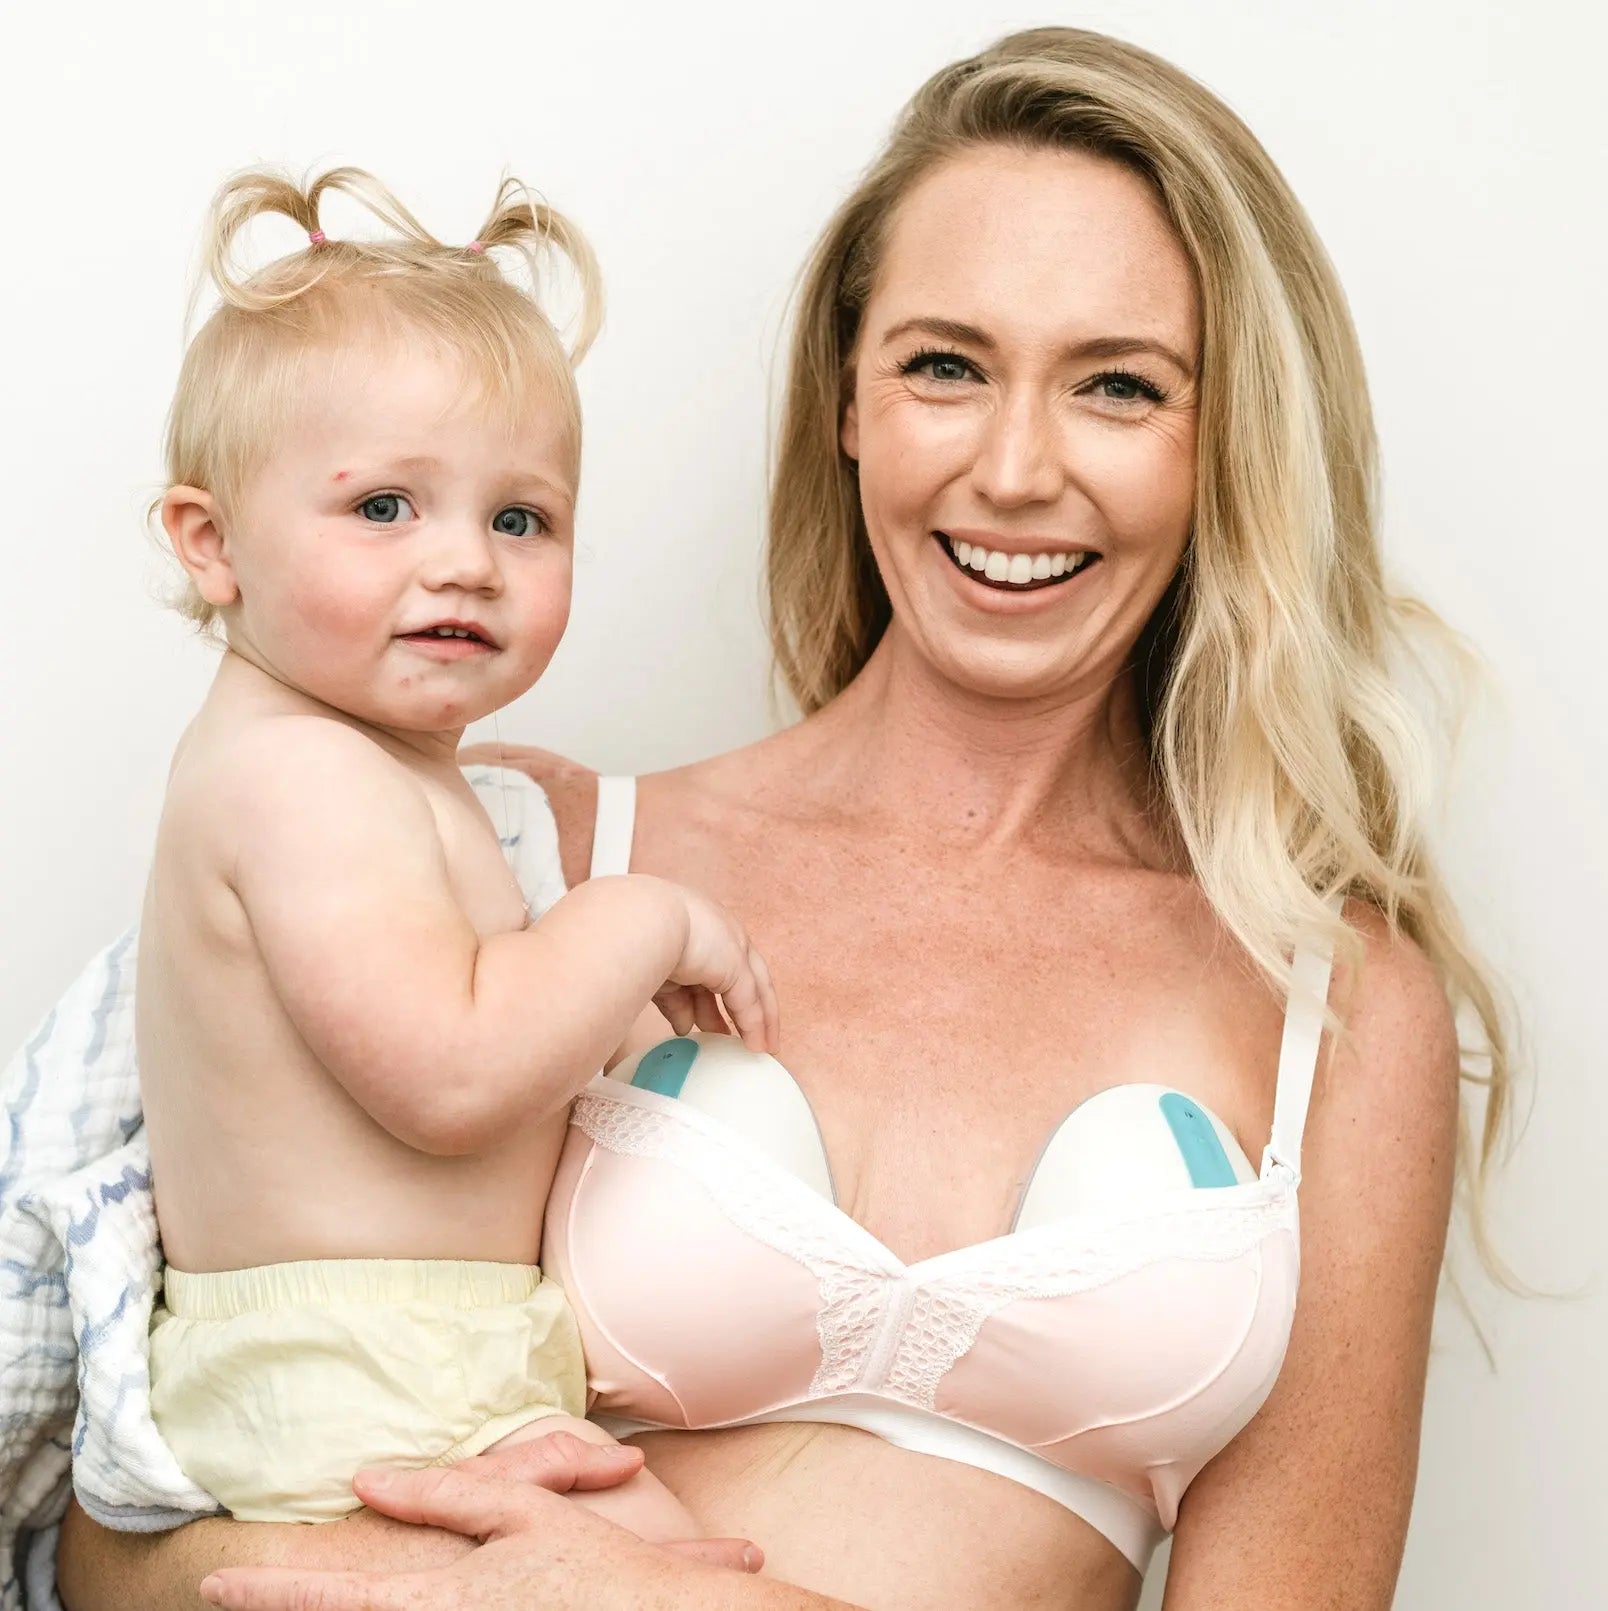 rose blush pumping bra image from the front, woman pumping with child